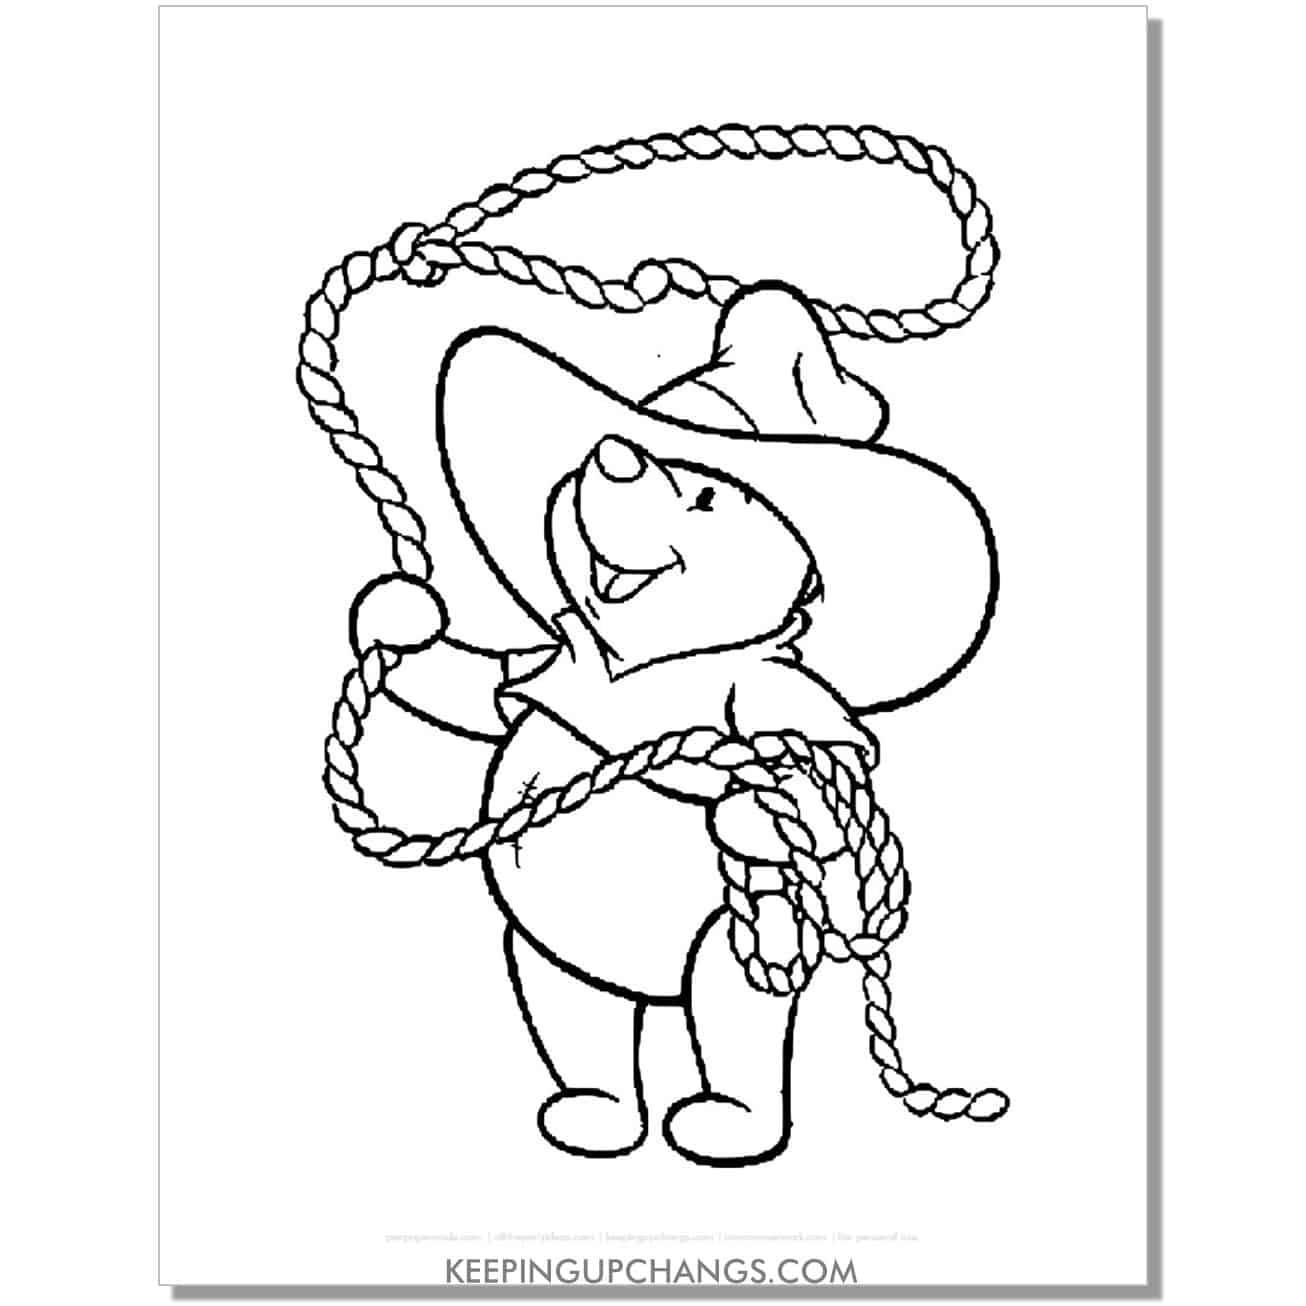 winnie the pooh with cowboy lasso coloring page, sheet.